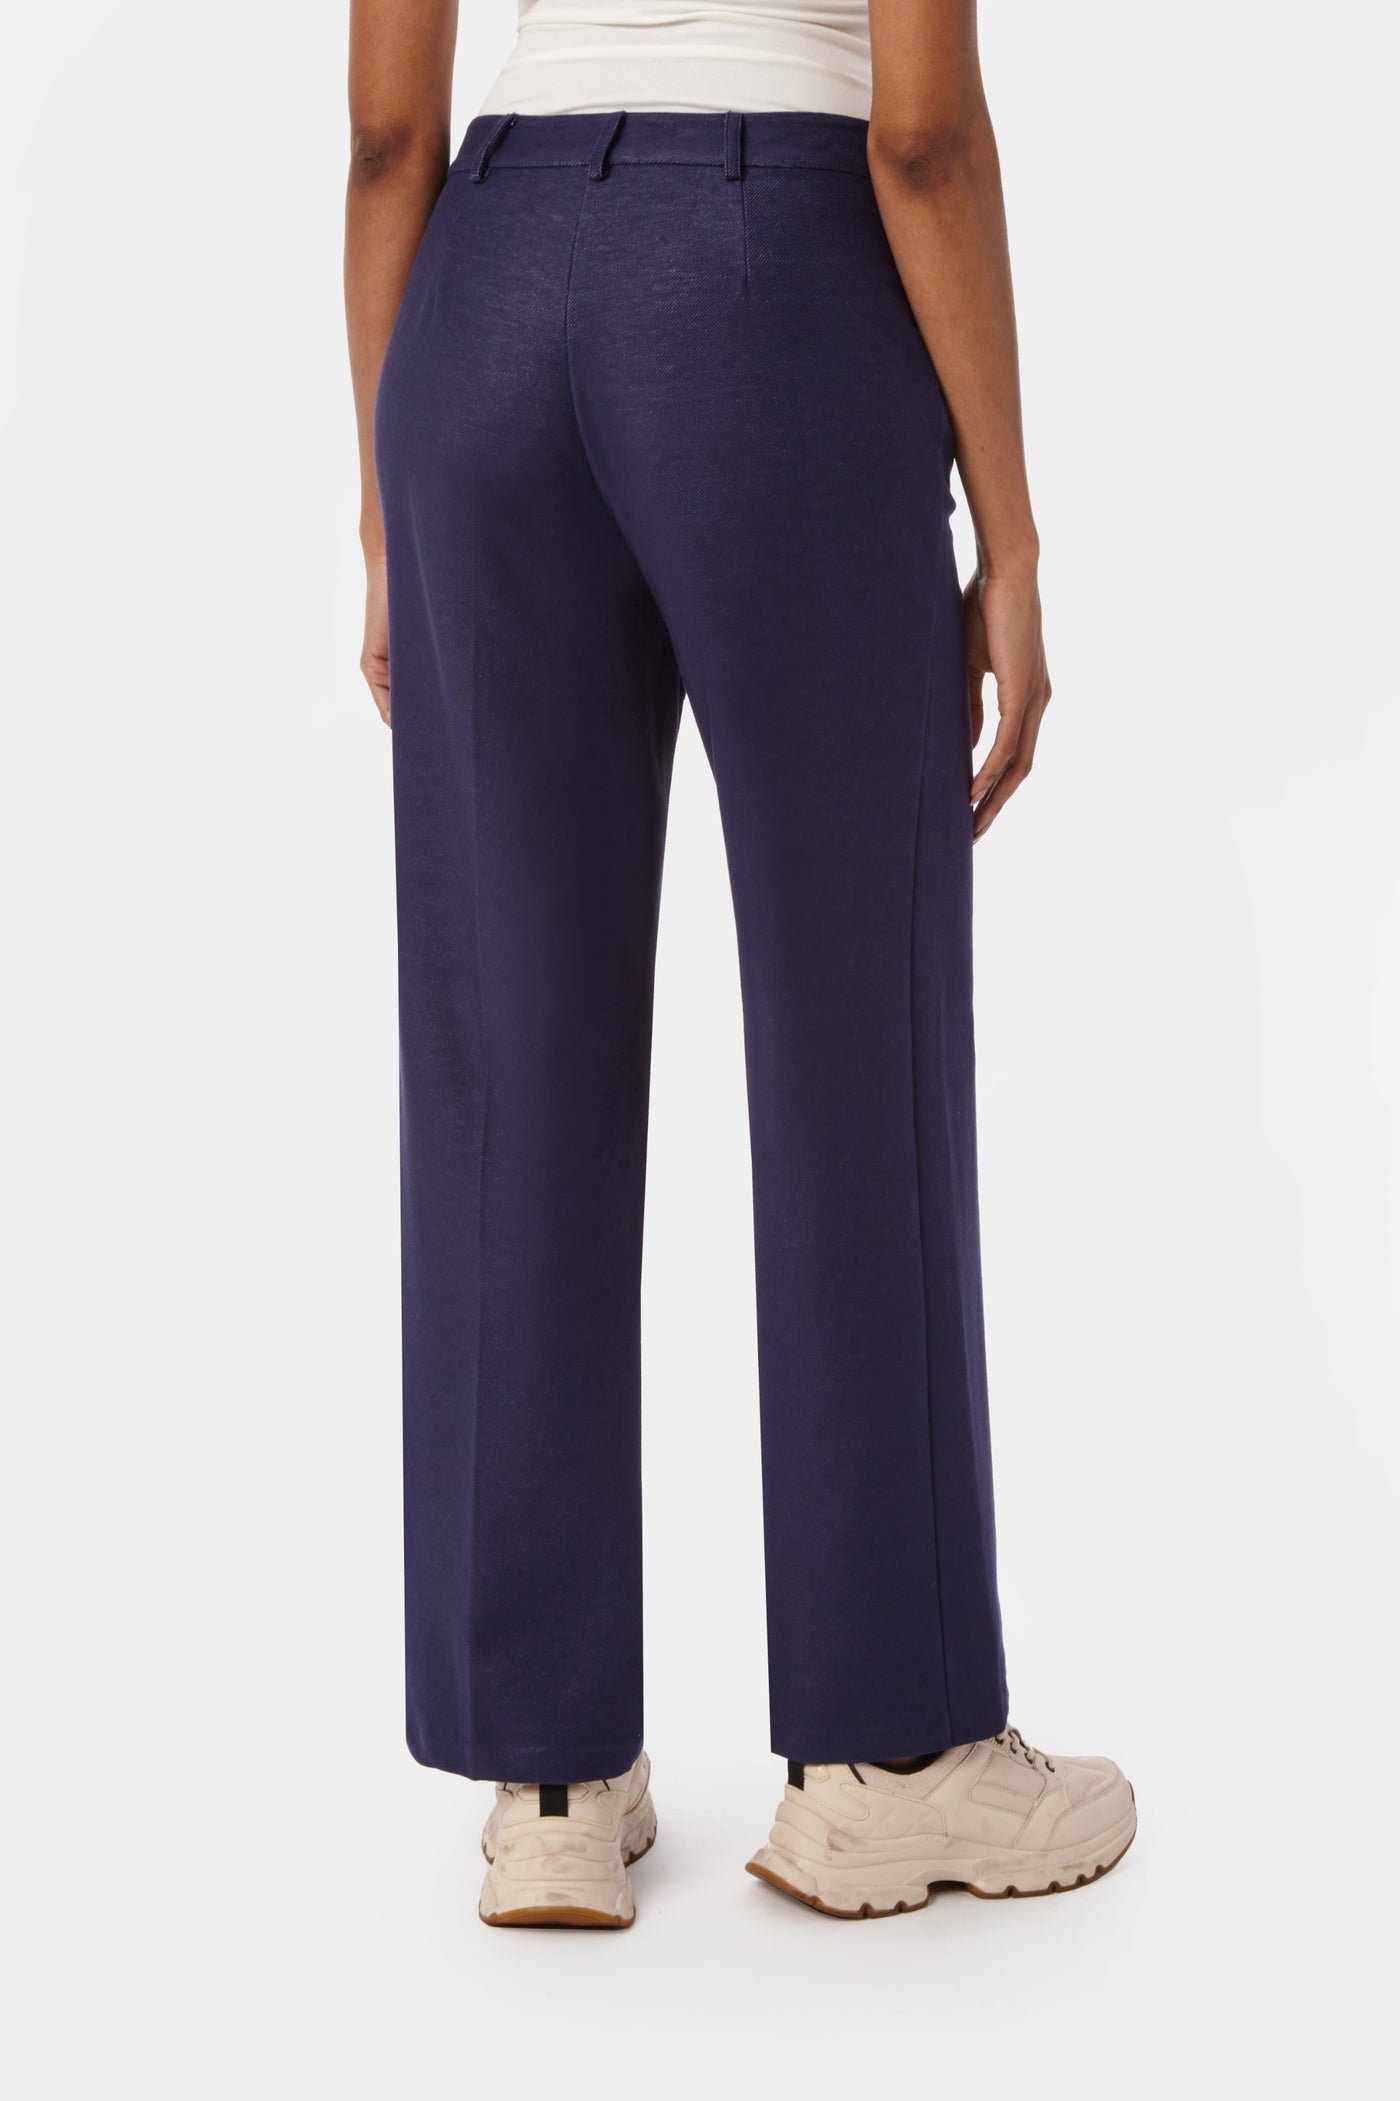 THE ALUDA PANT